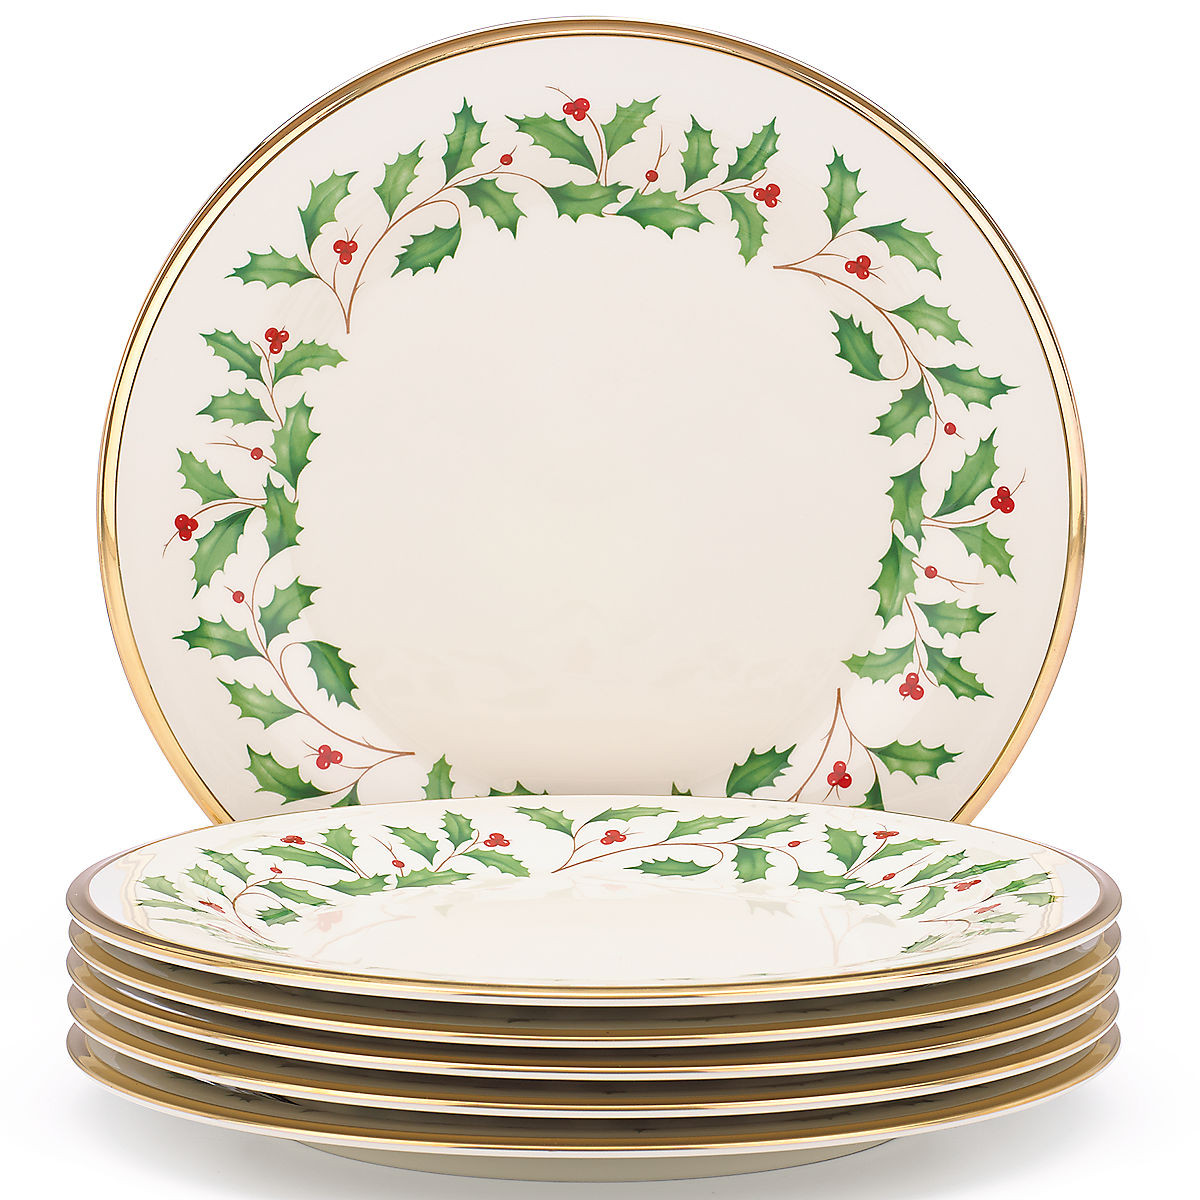 Holiday Dinner Plates
 Holiday 3 pc Dinner Plate Set Buy 3 Get 6